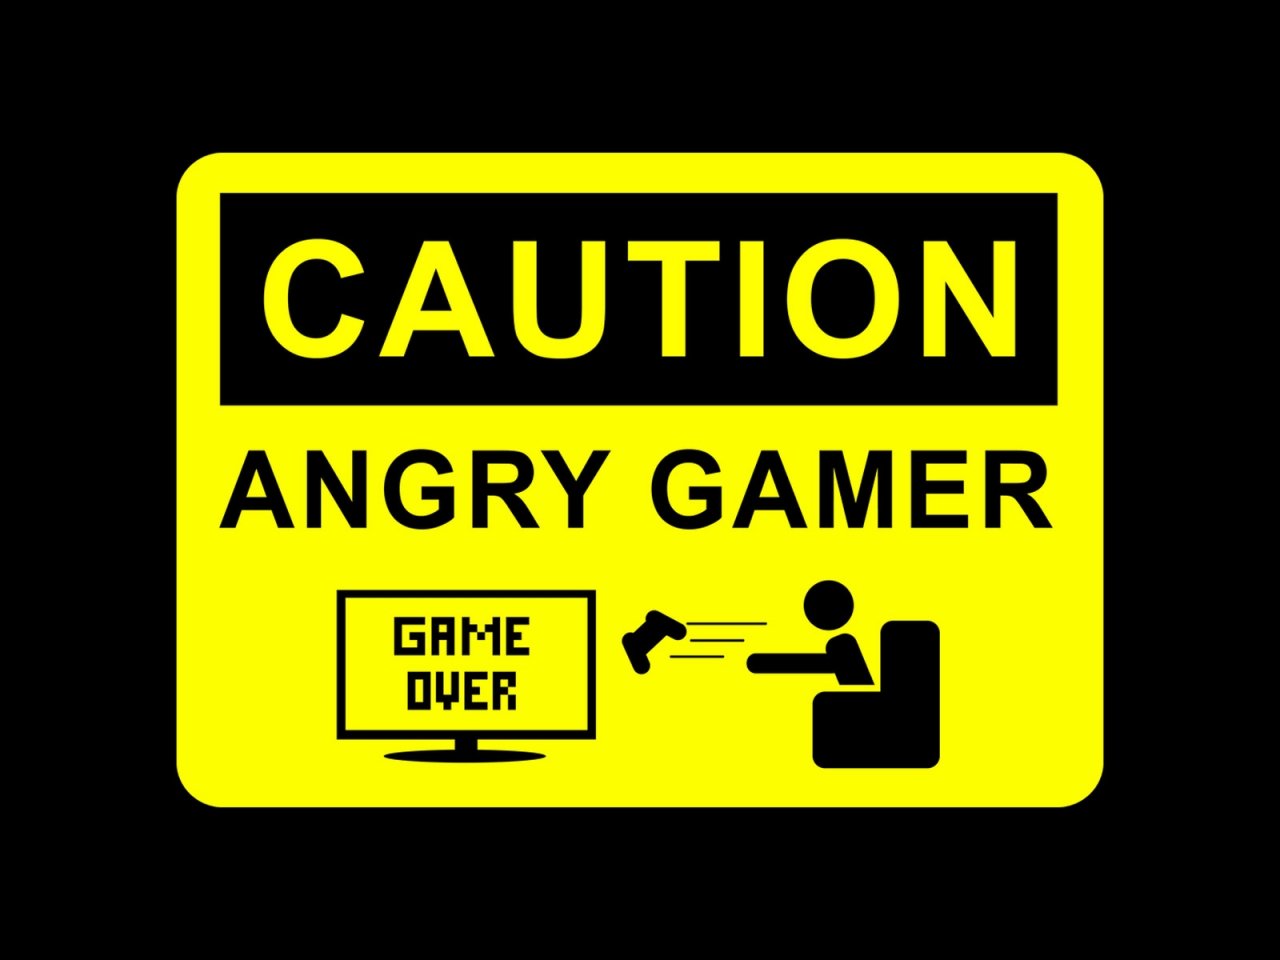 Angry Gamer for 1280 x 960 resolution